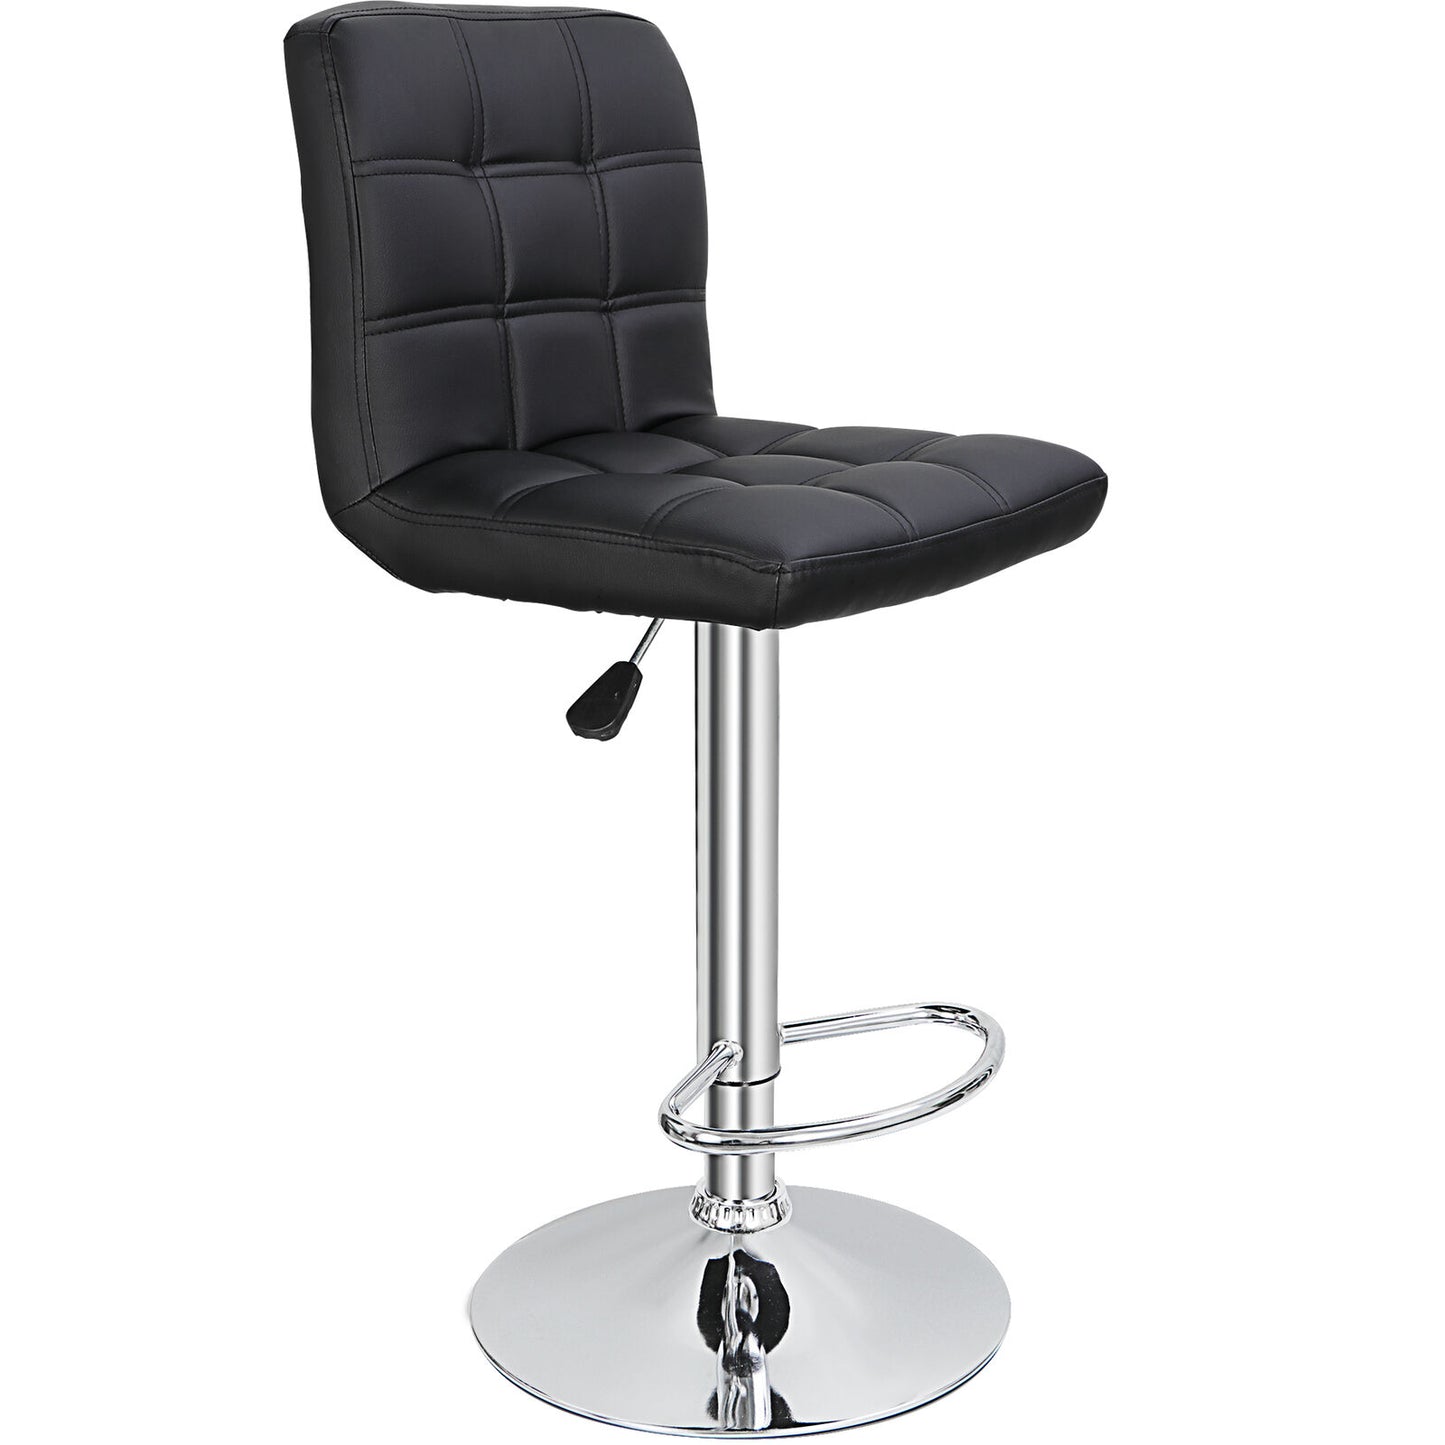 4PCS Adjustable Bar Stools PU Leather Modern Dinning Chair with Back